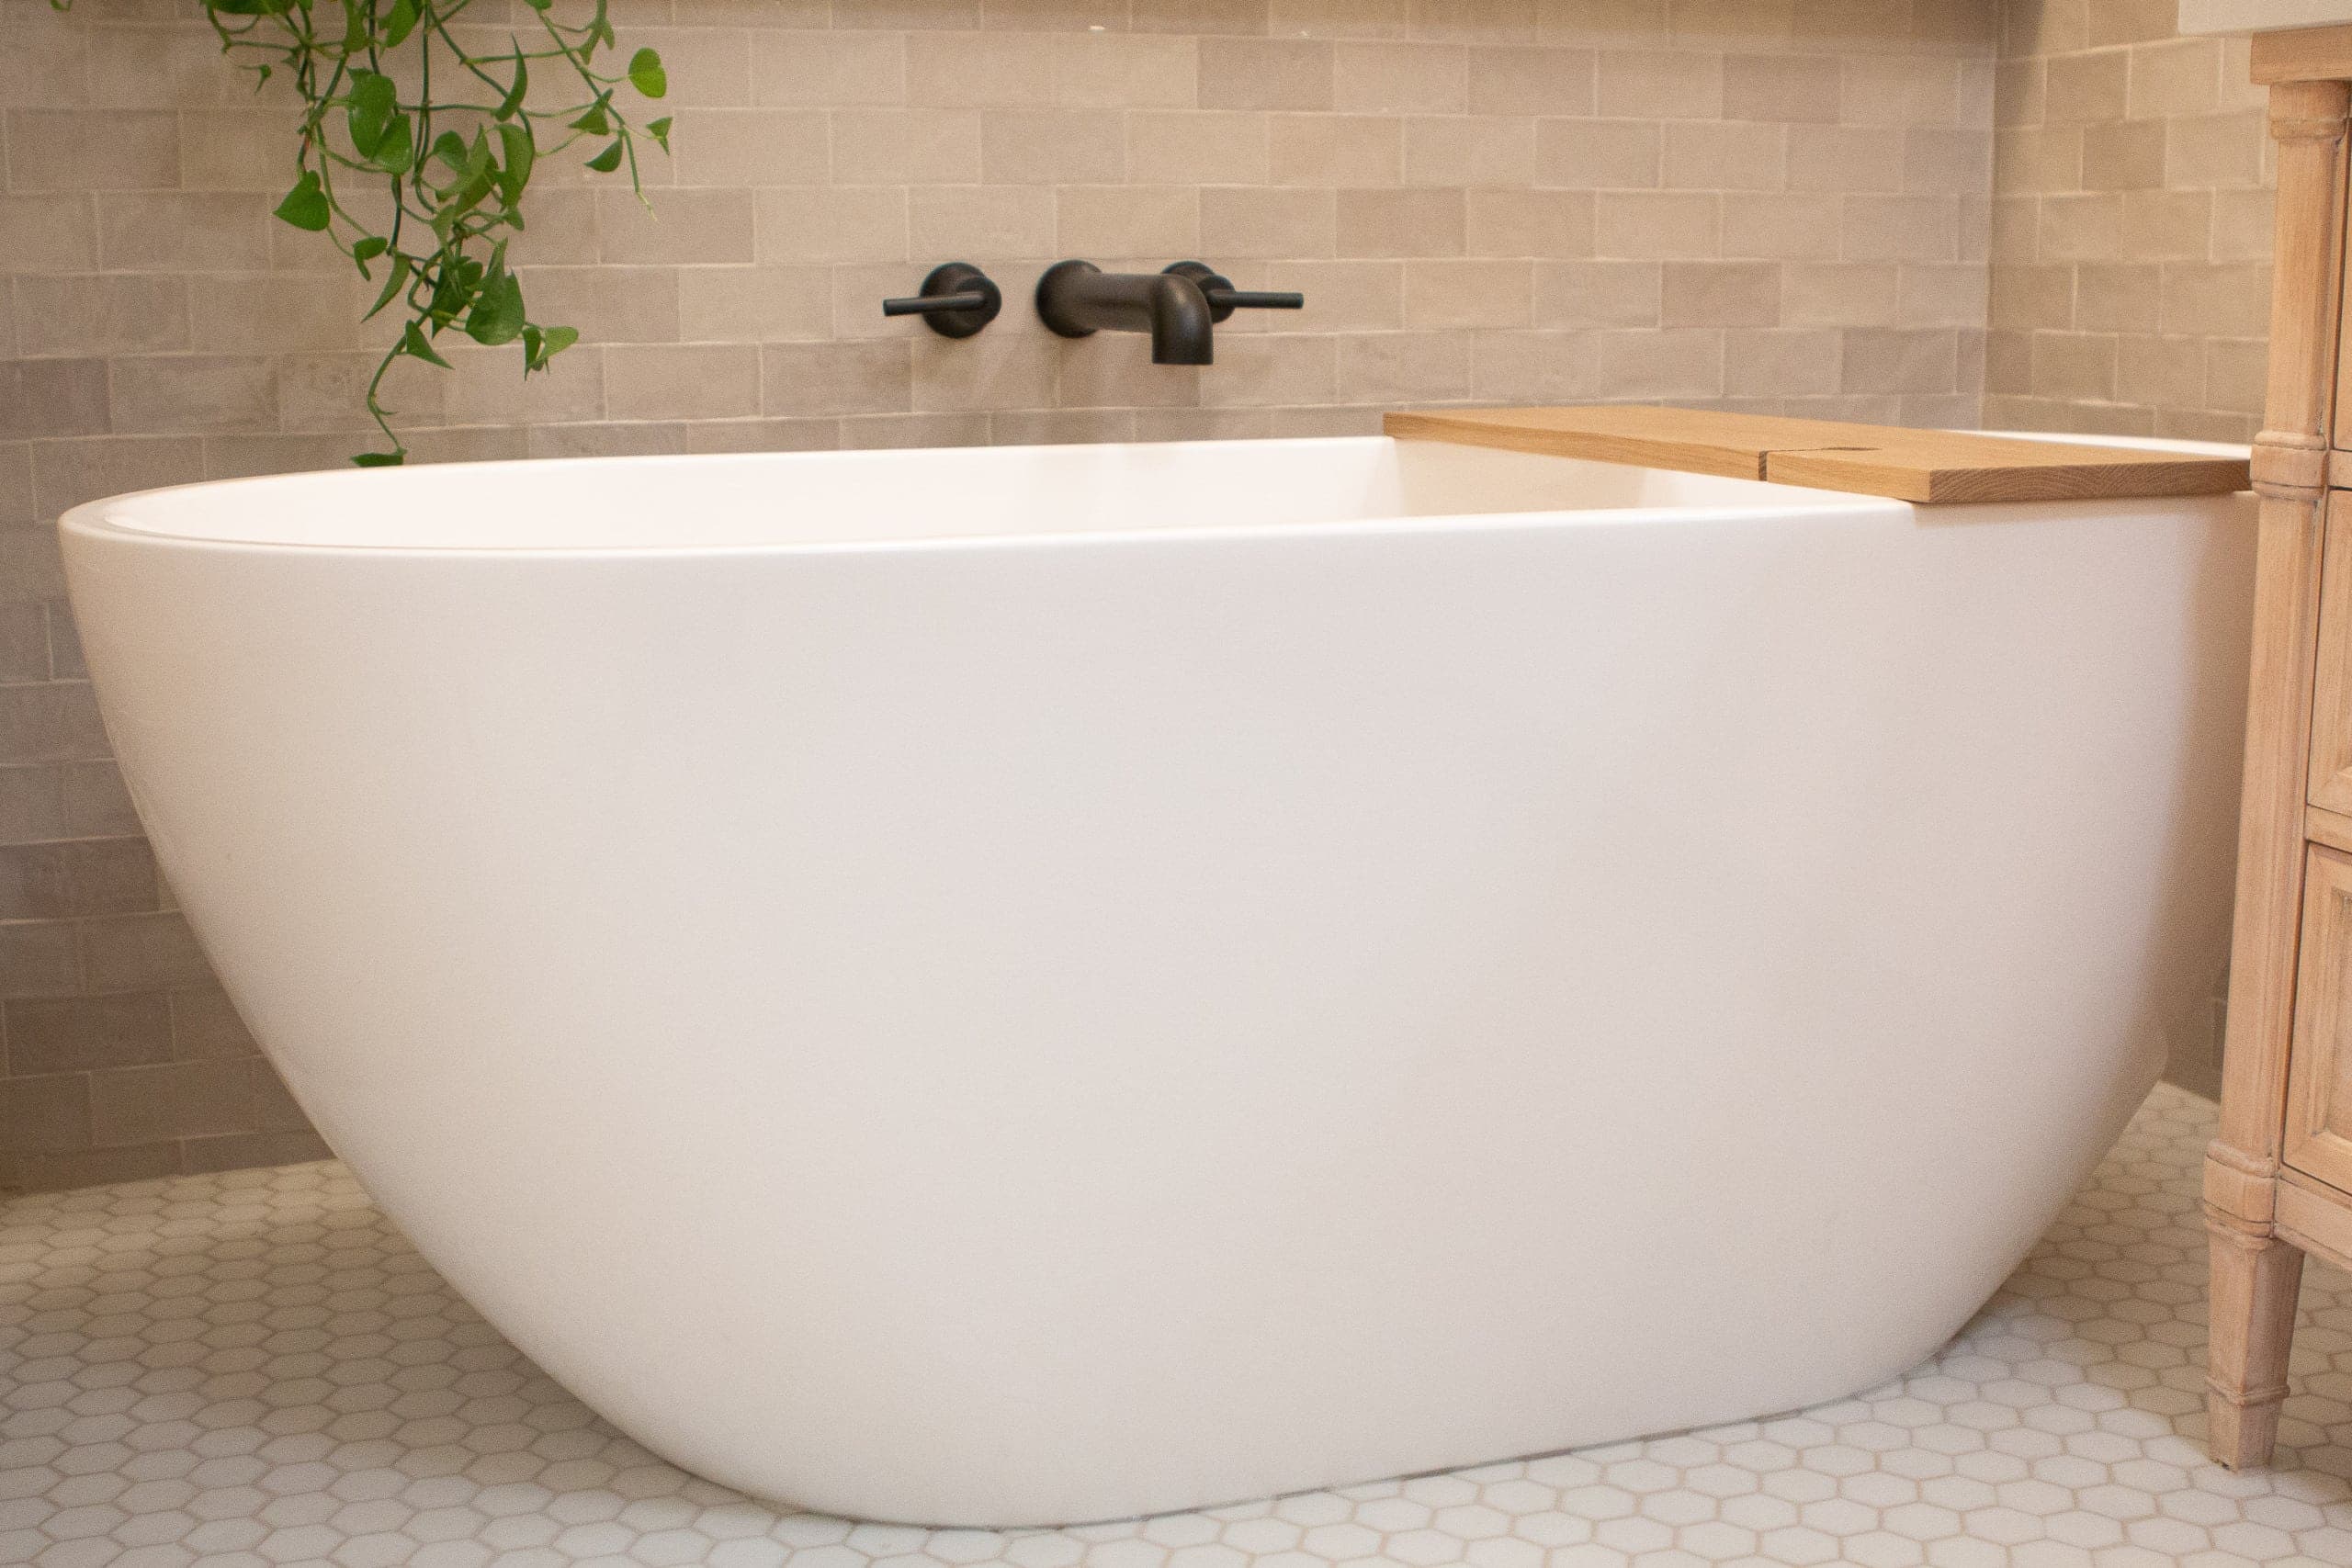 A freestanding tub in this main bathroom renovation